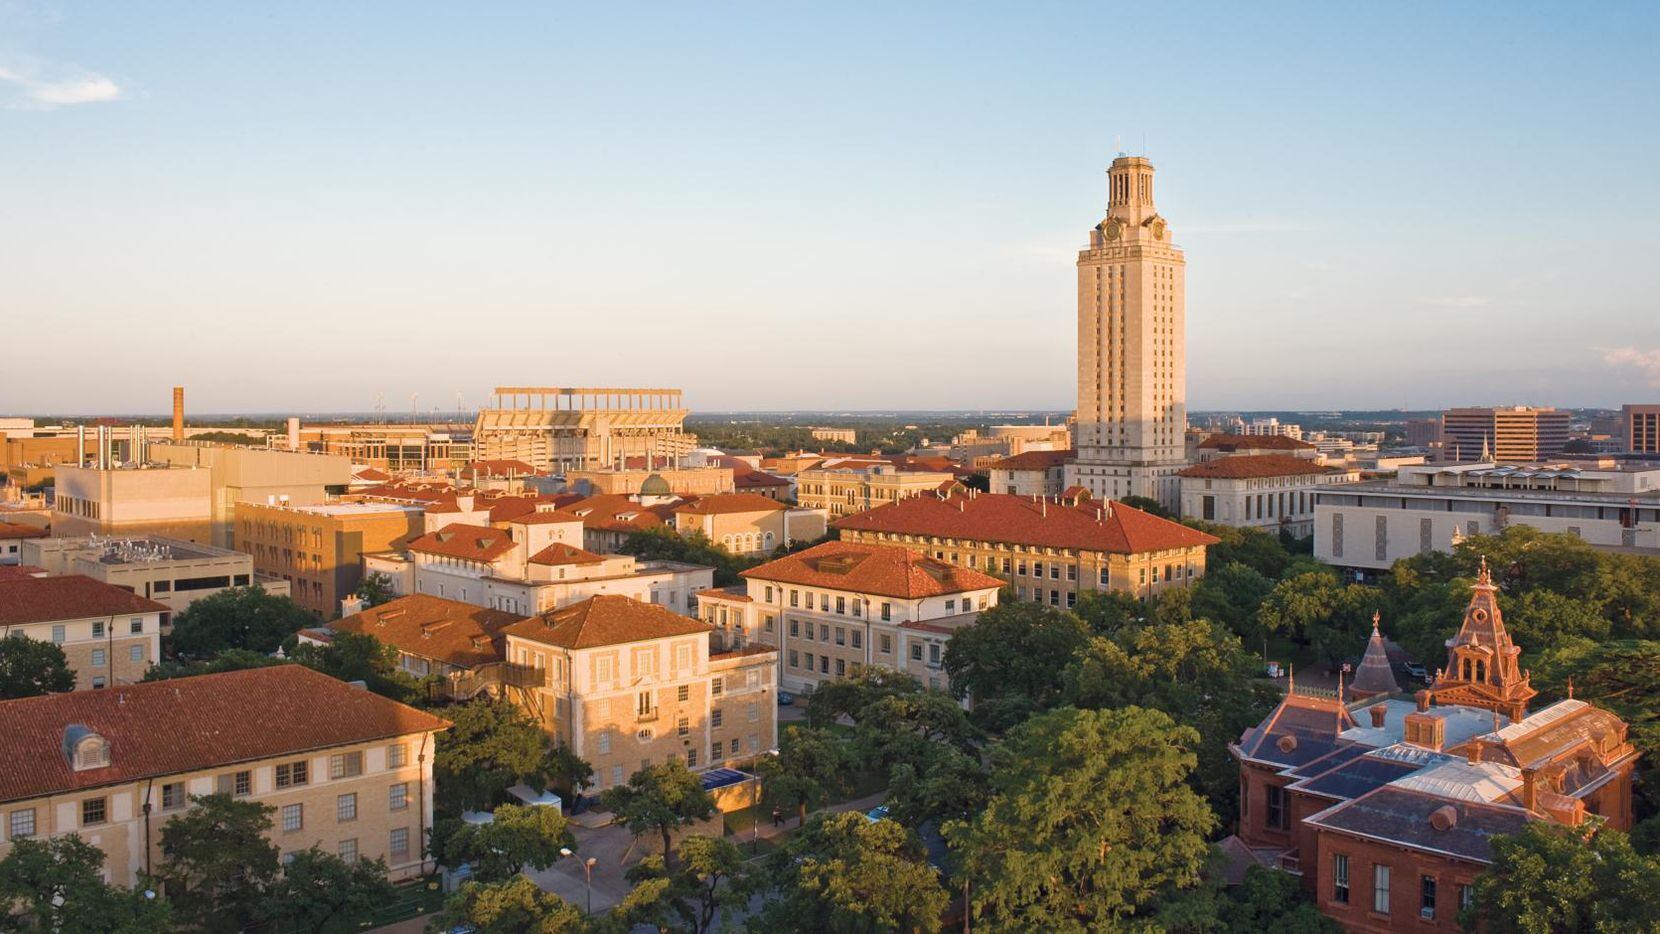 File photo of the University of Texas at Austin